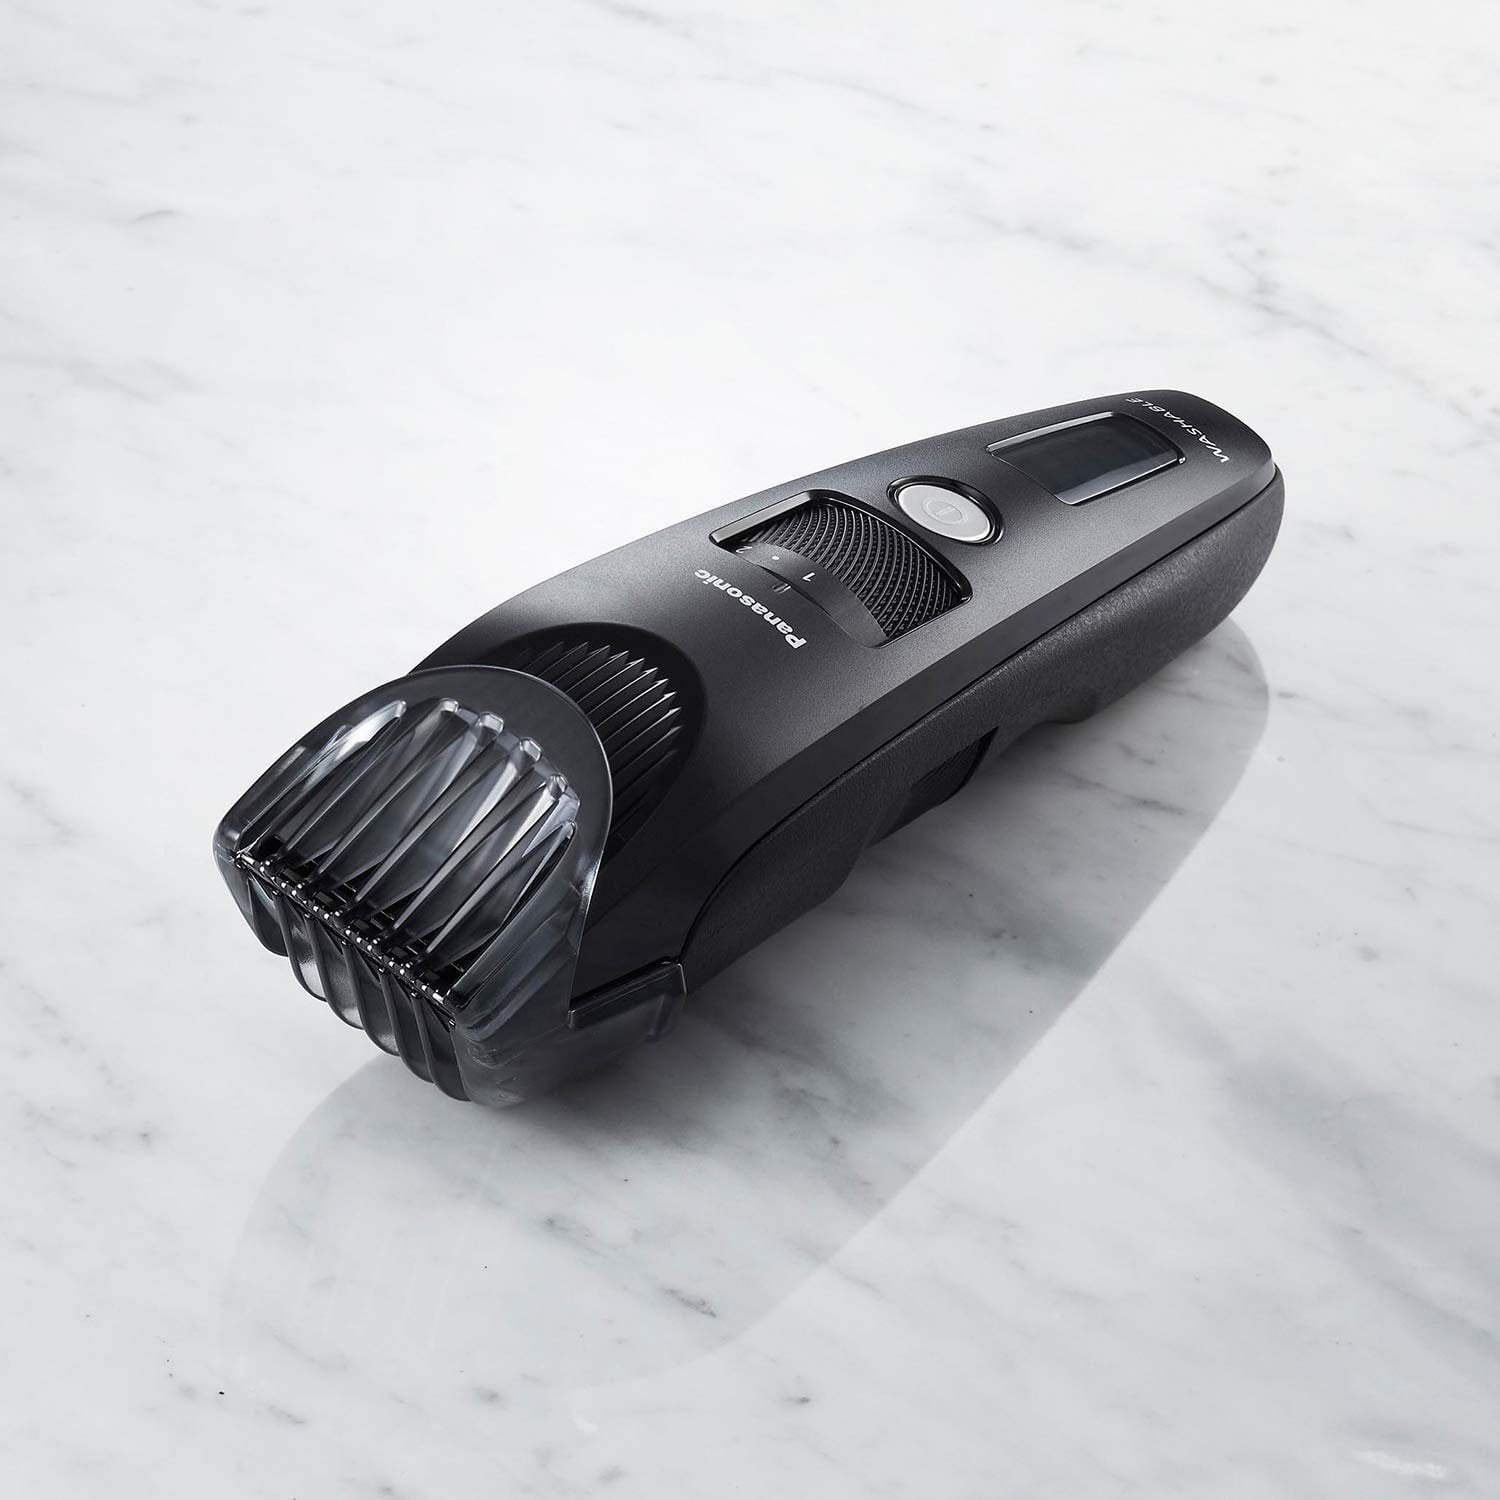 Panasonic Beard Trimmer for Men Precision Power, Hair with Attachment and 19 Adjustable Settings, Washable, ER-SB40-K - Walmart.com